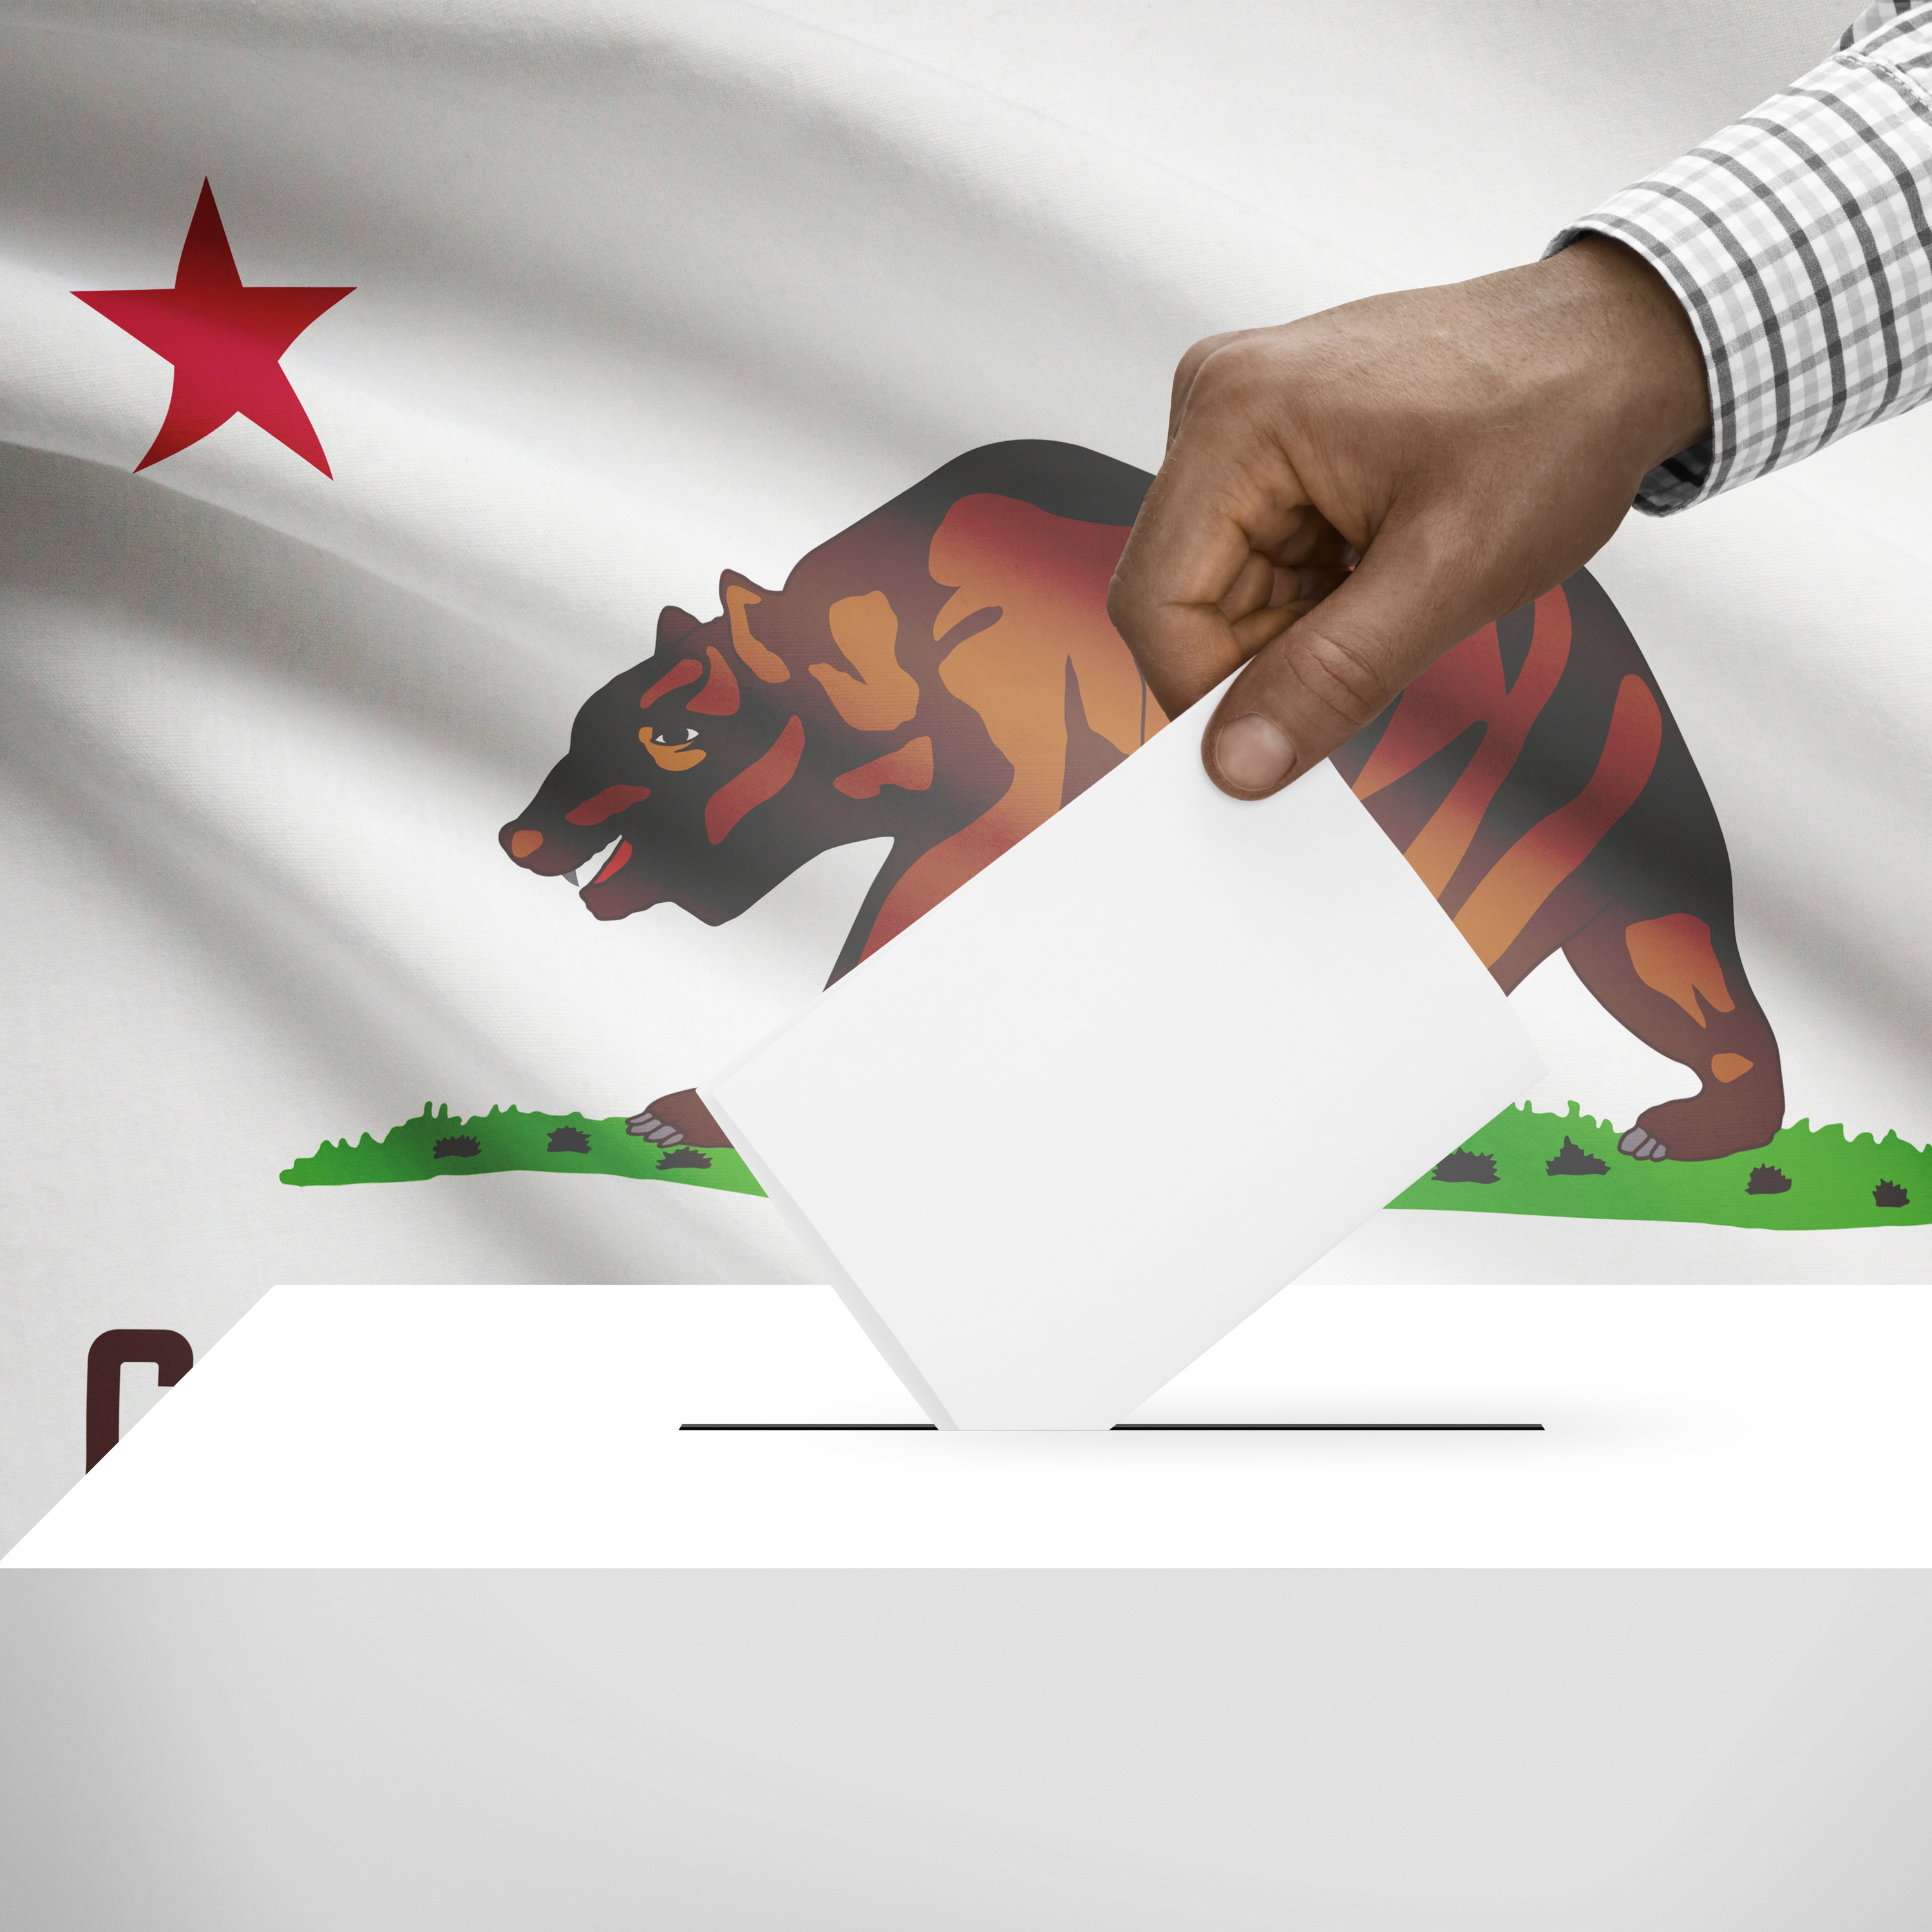 California could see record low voter turnout this primary. Why the apathy?